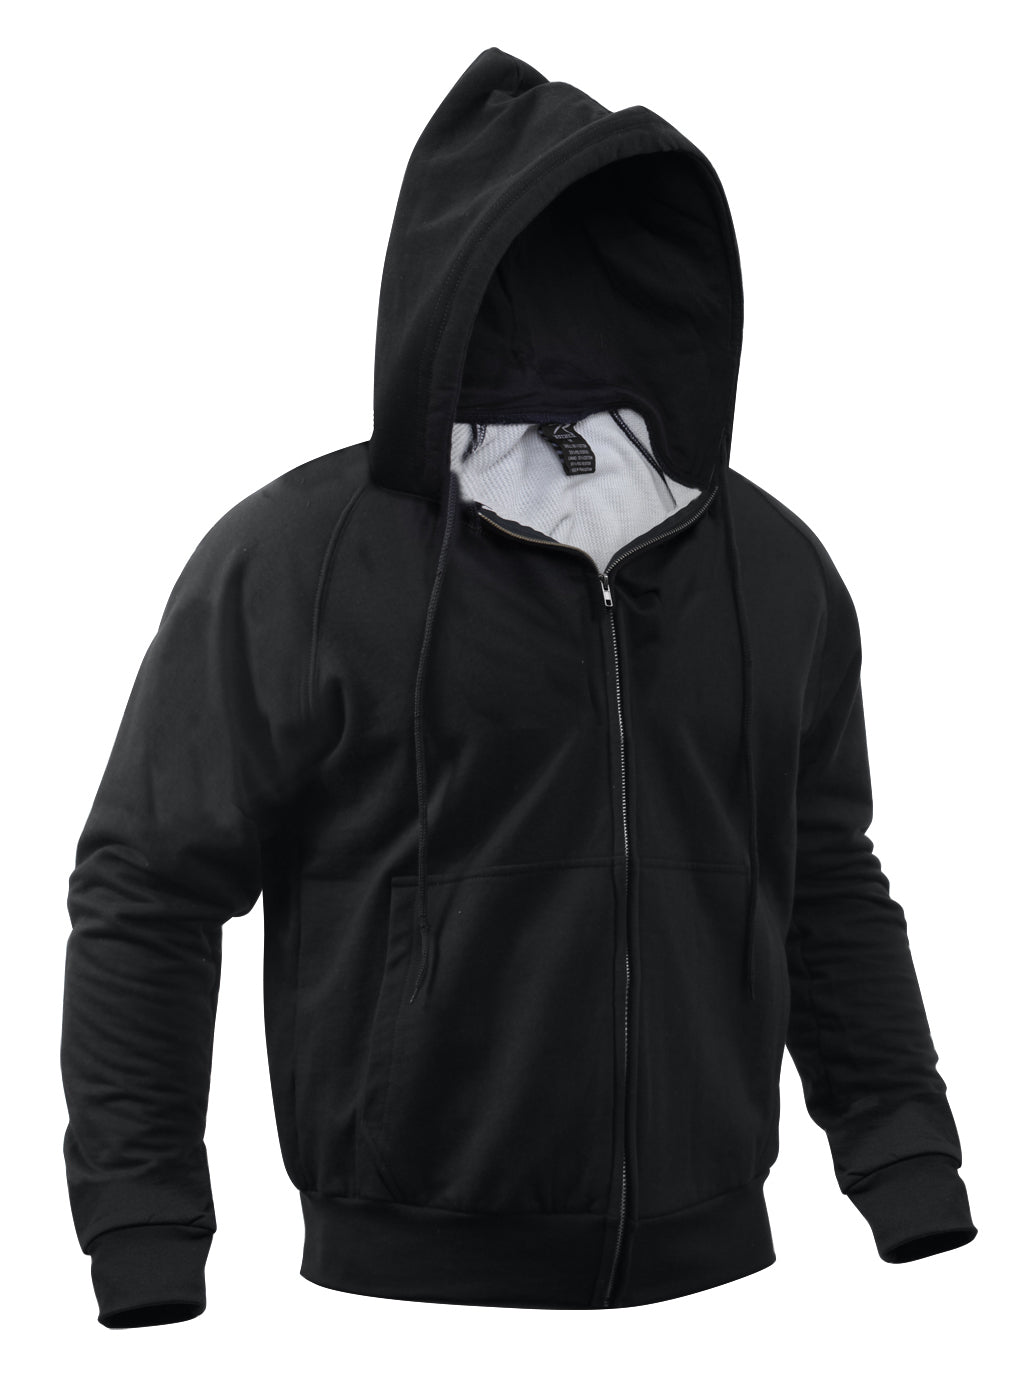 Poly/Cotton Thermal-Lined Zipper Hooded Sweatshirts Black